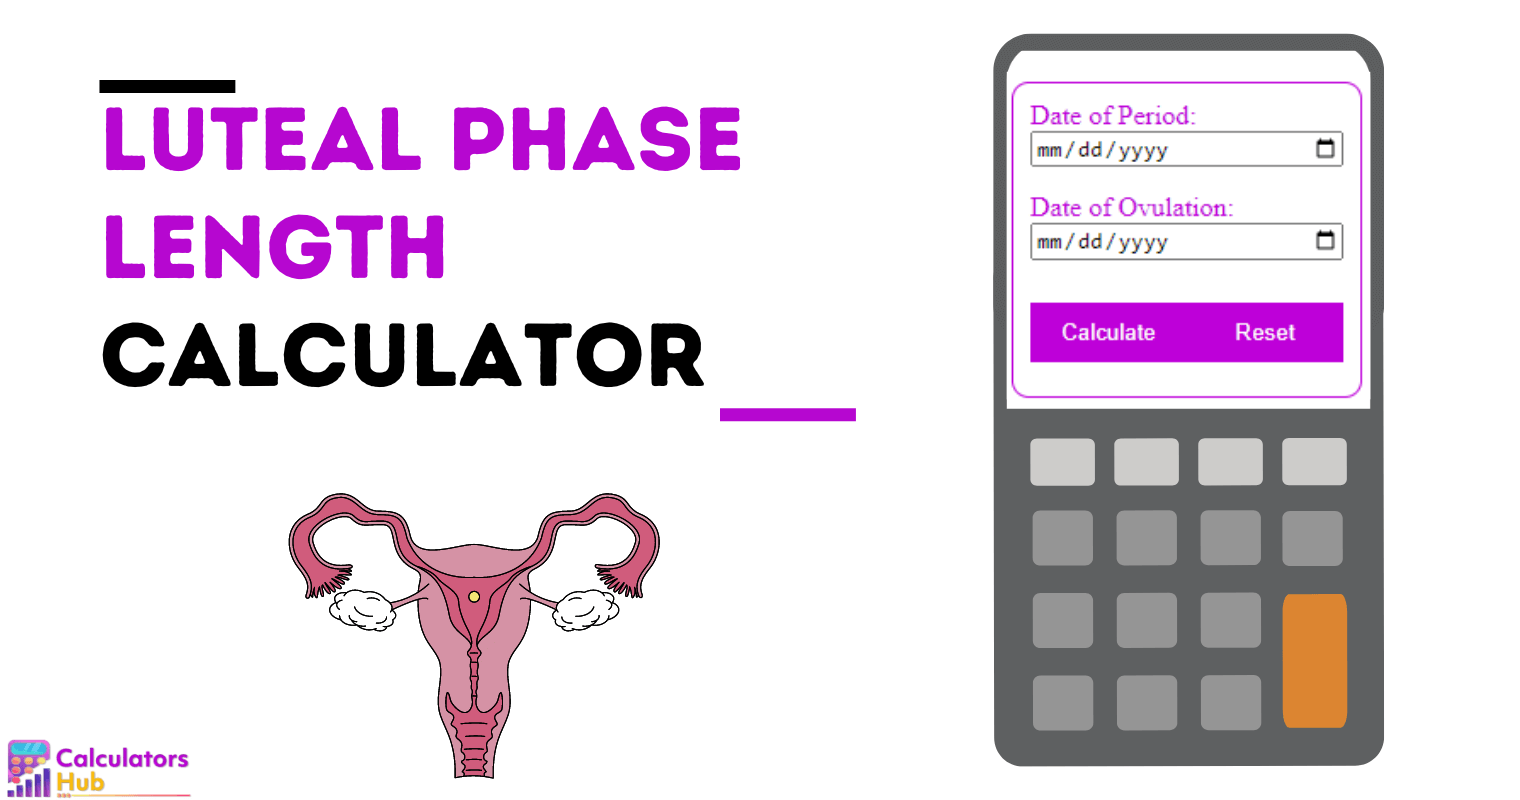 Luteal Phase Length Calculator